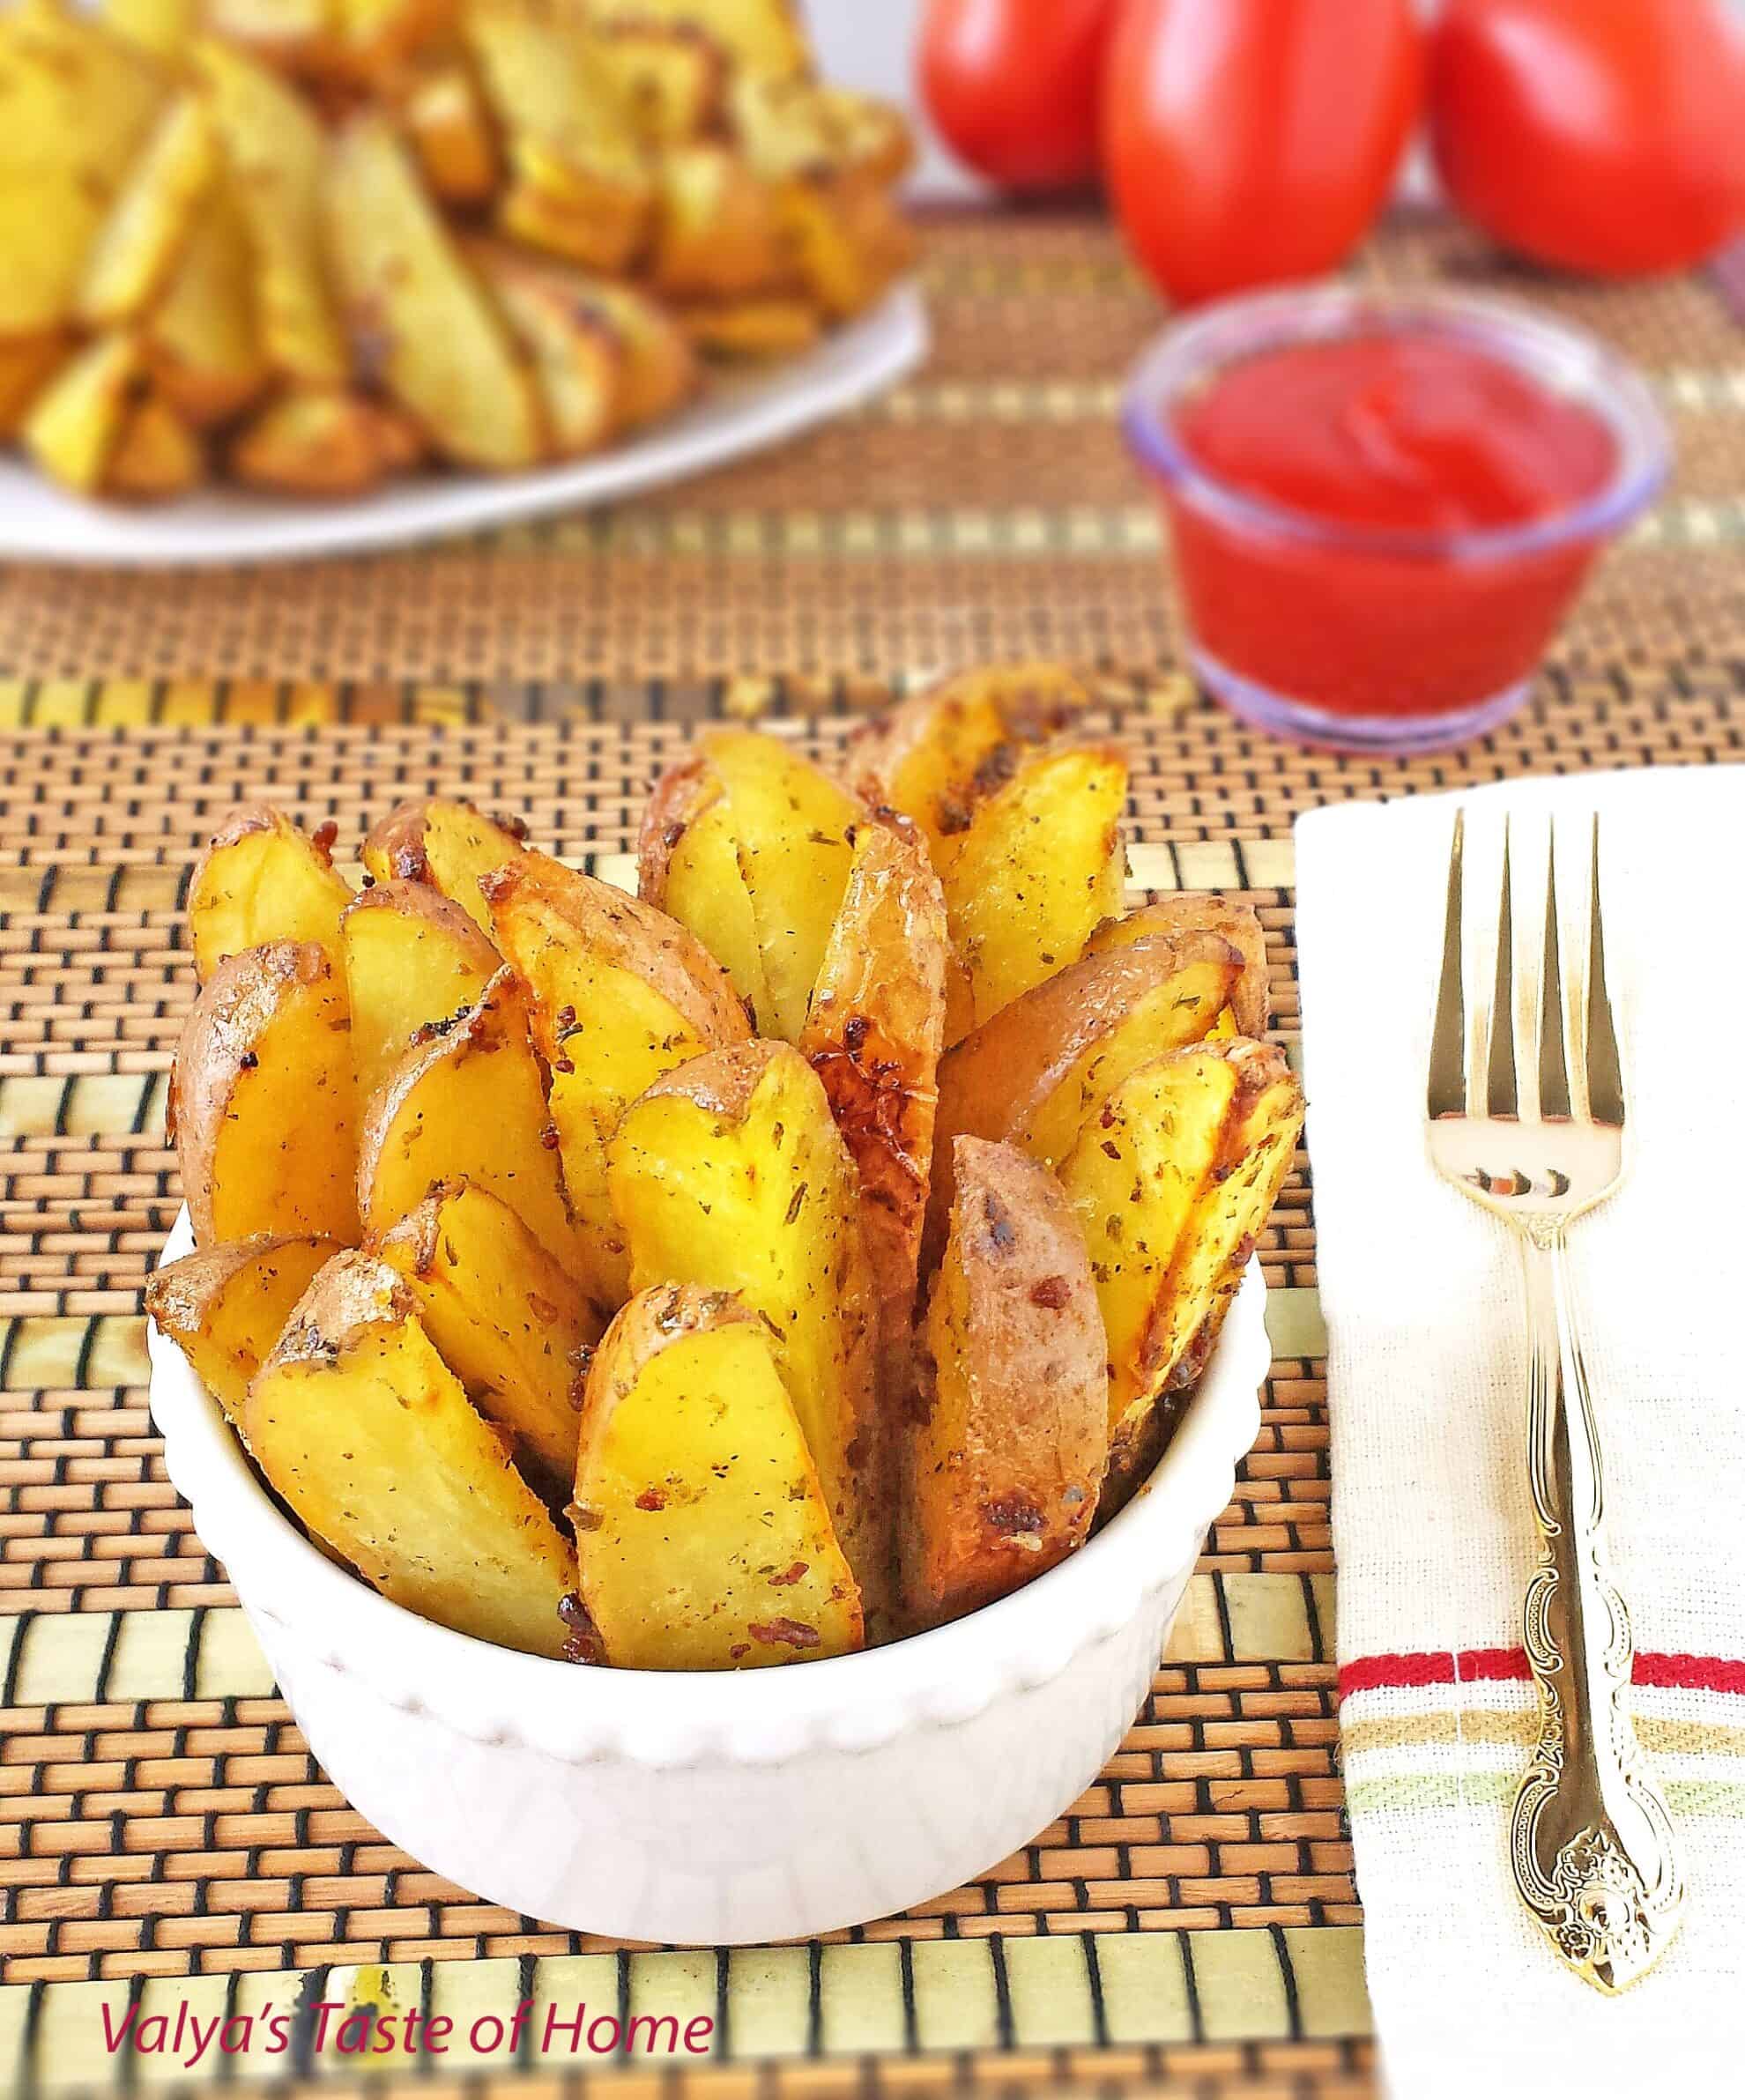 Bacon and Chive Roasted Potato Wedges